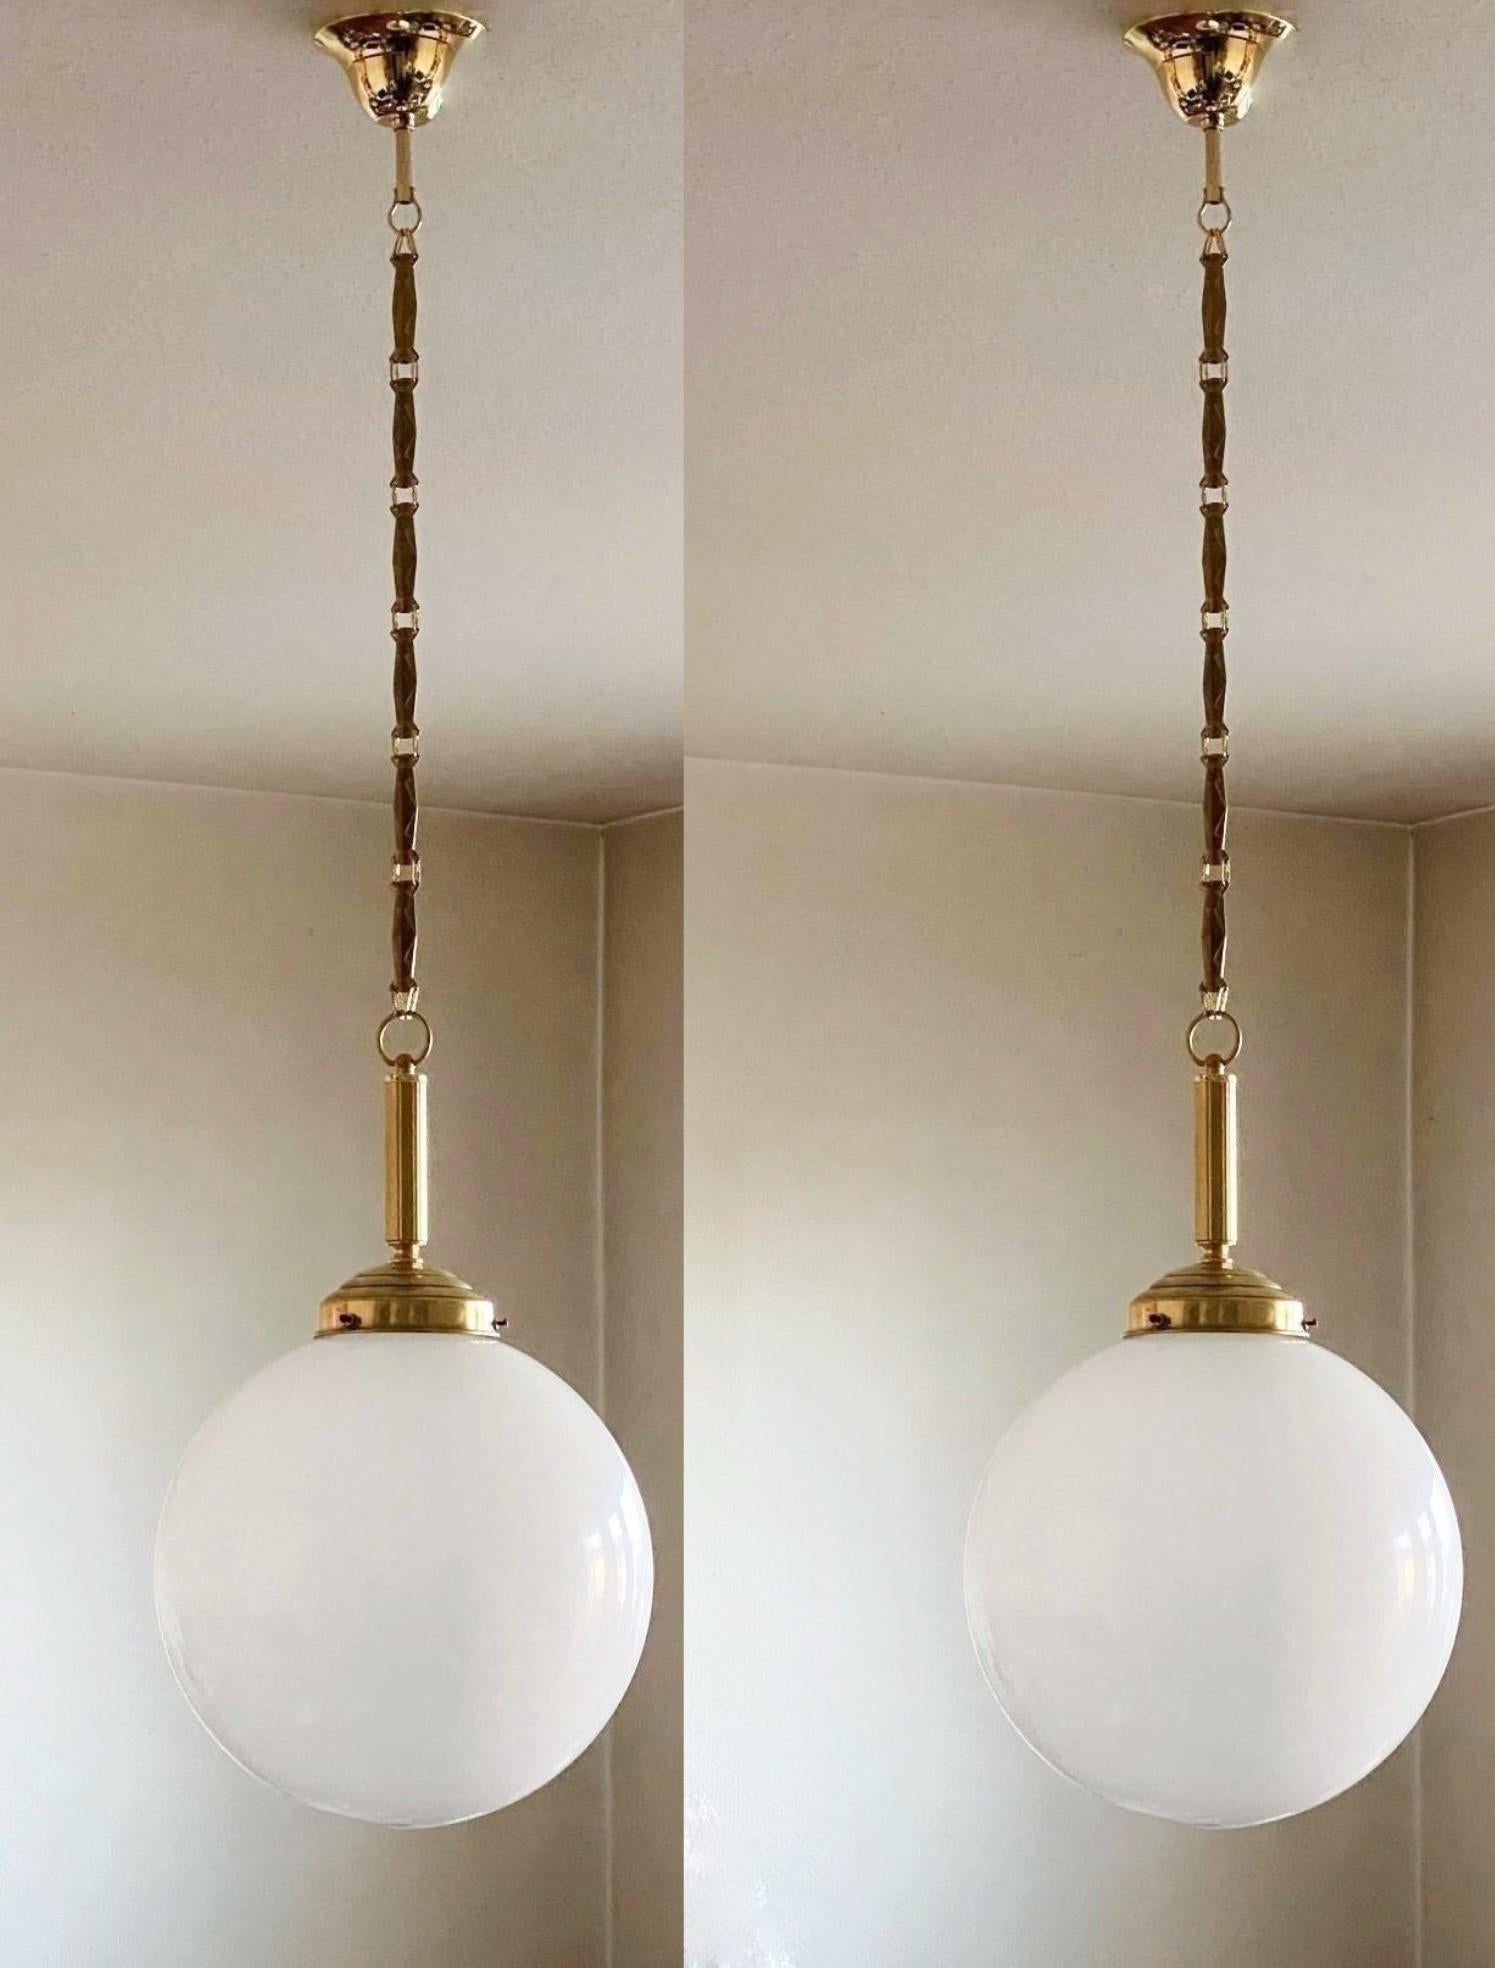 Pair of  hand blown opaline glass ball pendant with brass mounts, chain and canopy, Italy, 1940s.
One porcelain Edison E-27 light socket for a large sized screw bulb up to 100W. Both pendants in very good condition,   no damages,